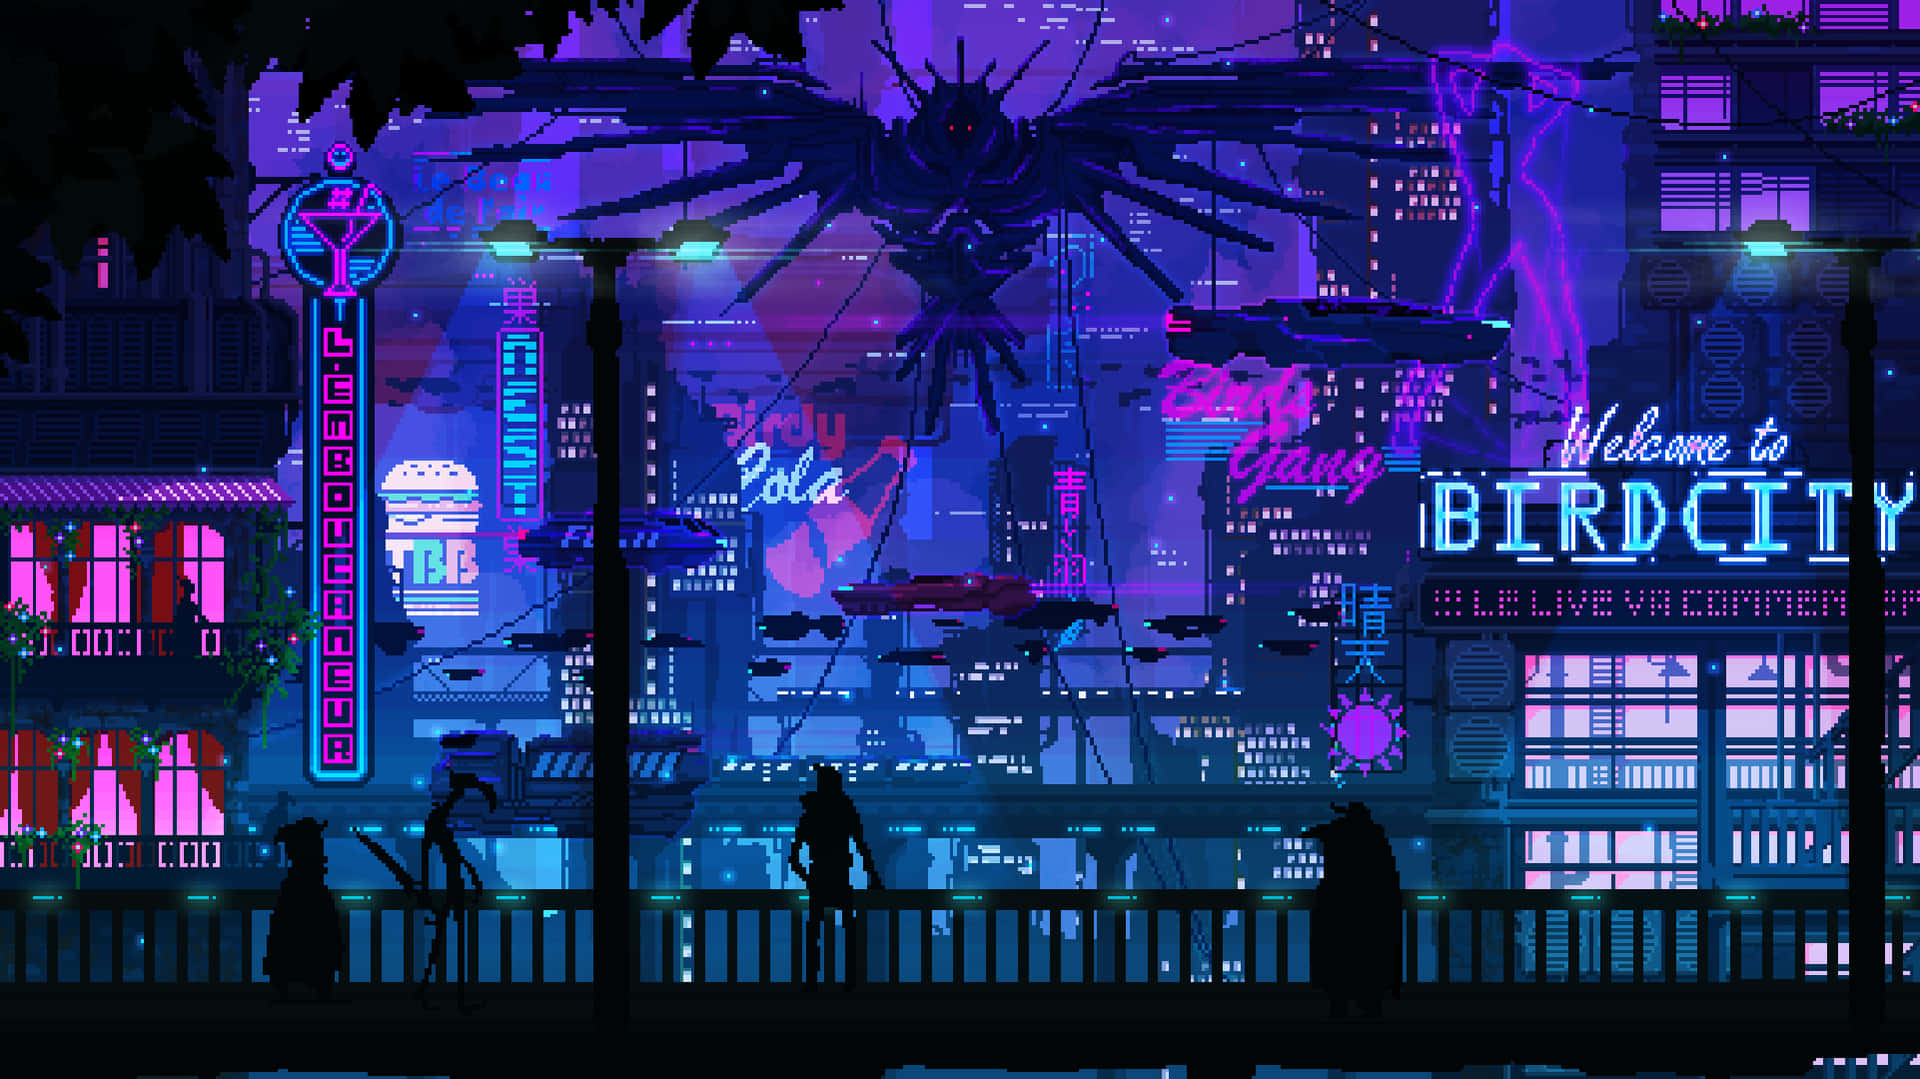 artists  pixel art  new  kirokaze  SciFi  cyberpunk  gif gif  animation animated pictures  funny pictures  best jokes comics  images video humor gif animation  i lold